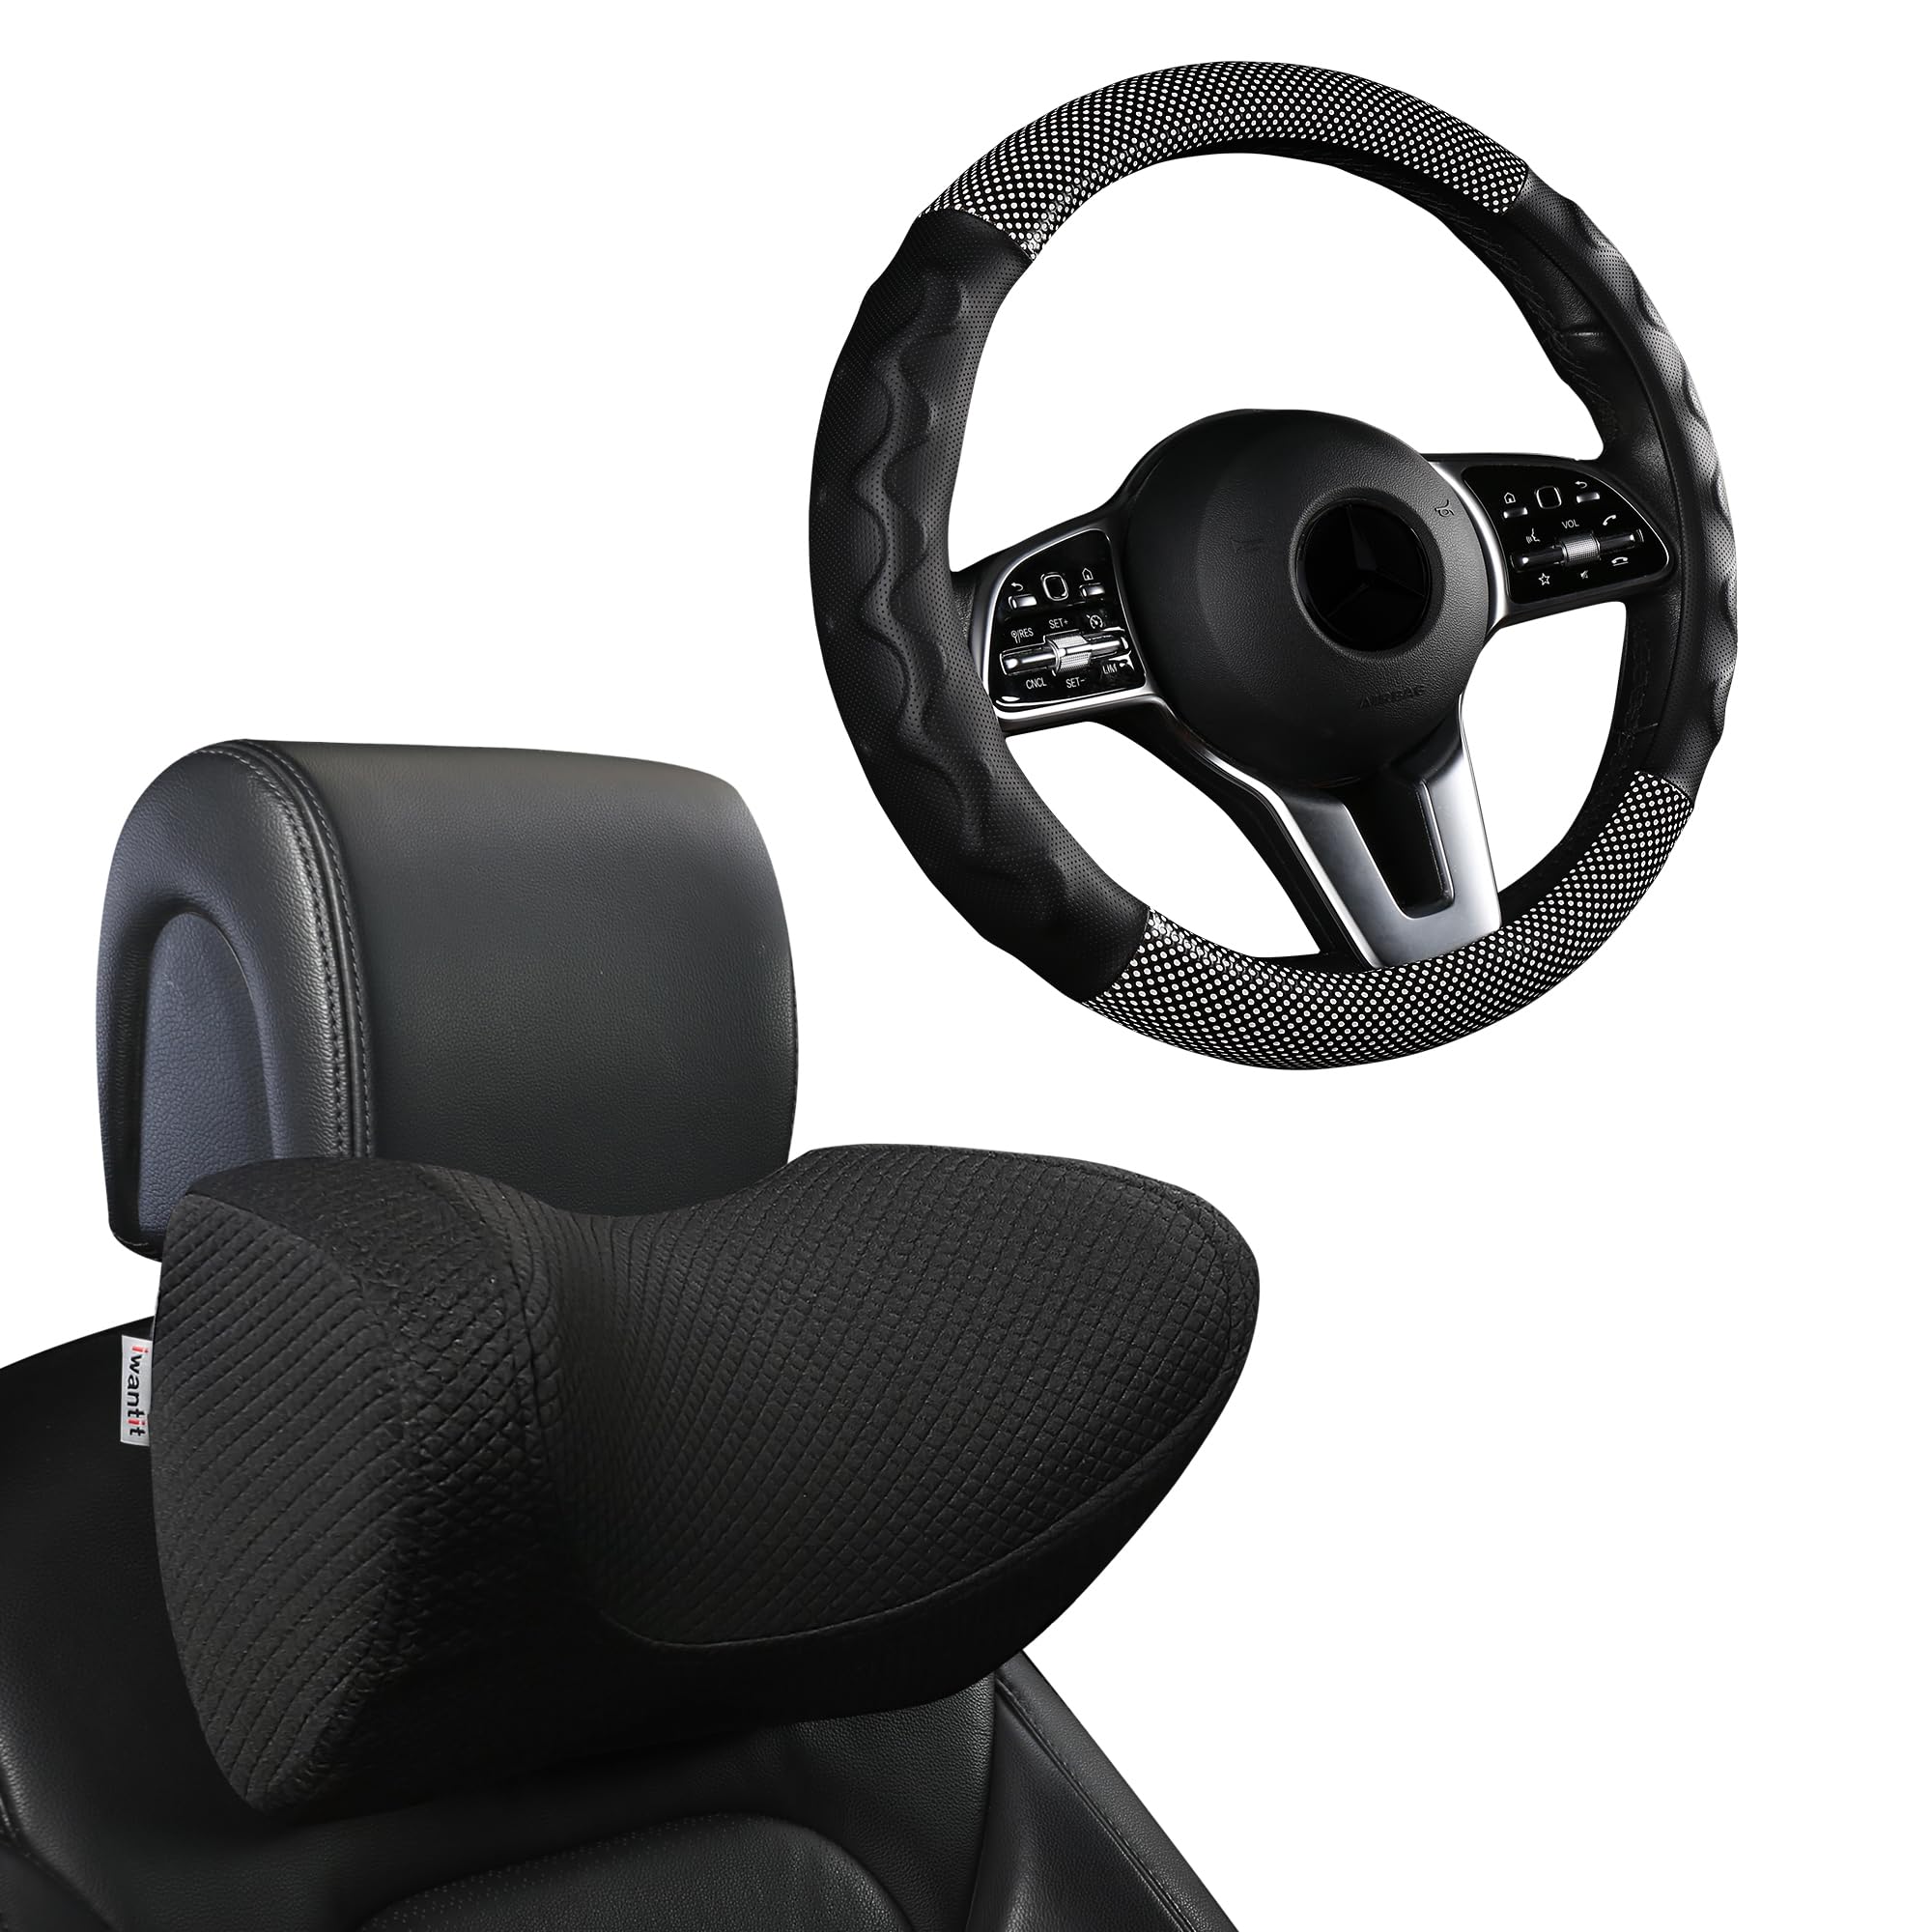 iwantit Black Car Seat Neck Pillow and The Black/White Gel Steering Wheel Cover